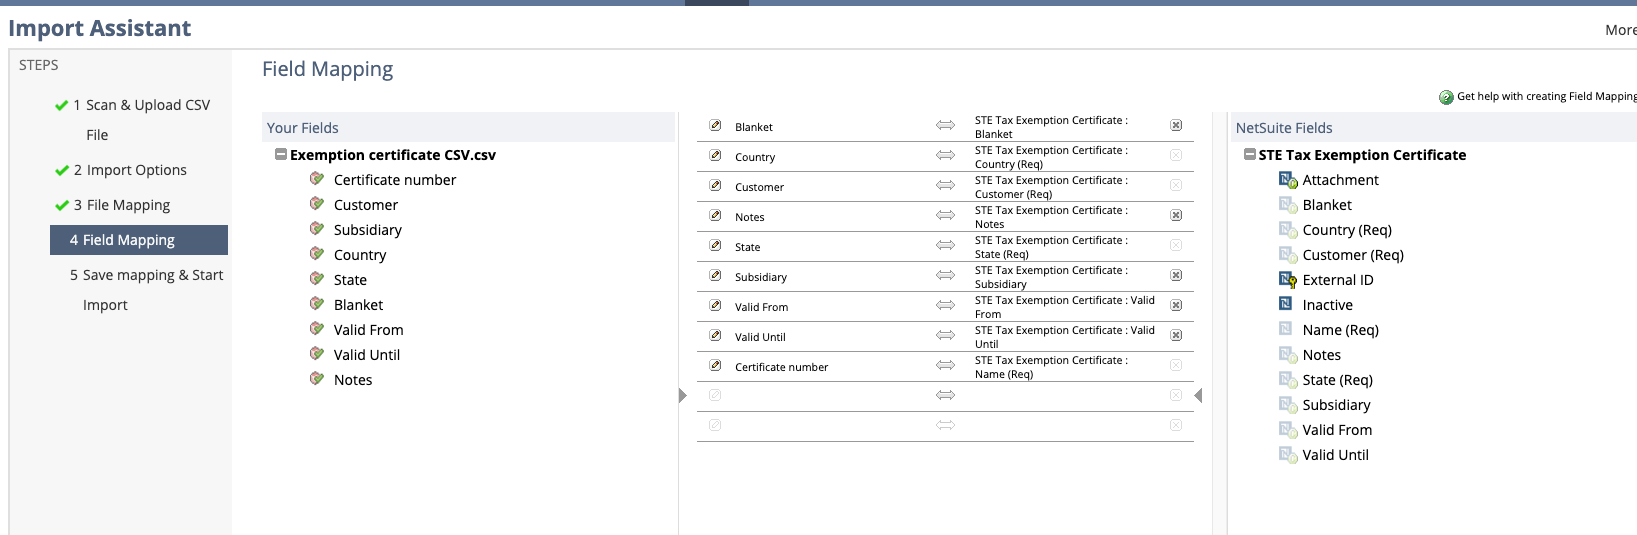 This image shows the fields mapping for importing exemption certificates as CSV